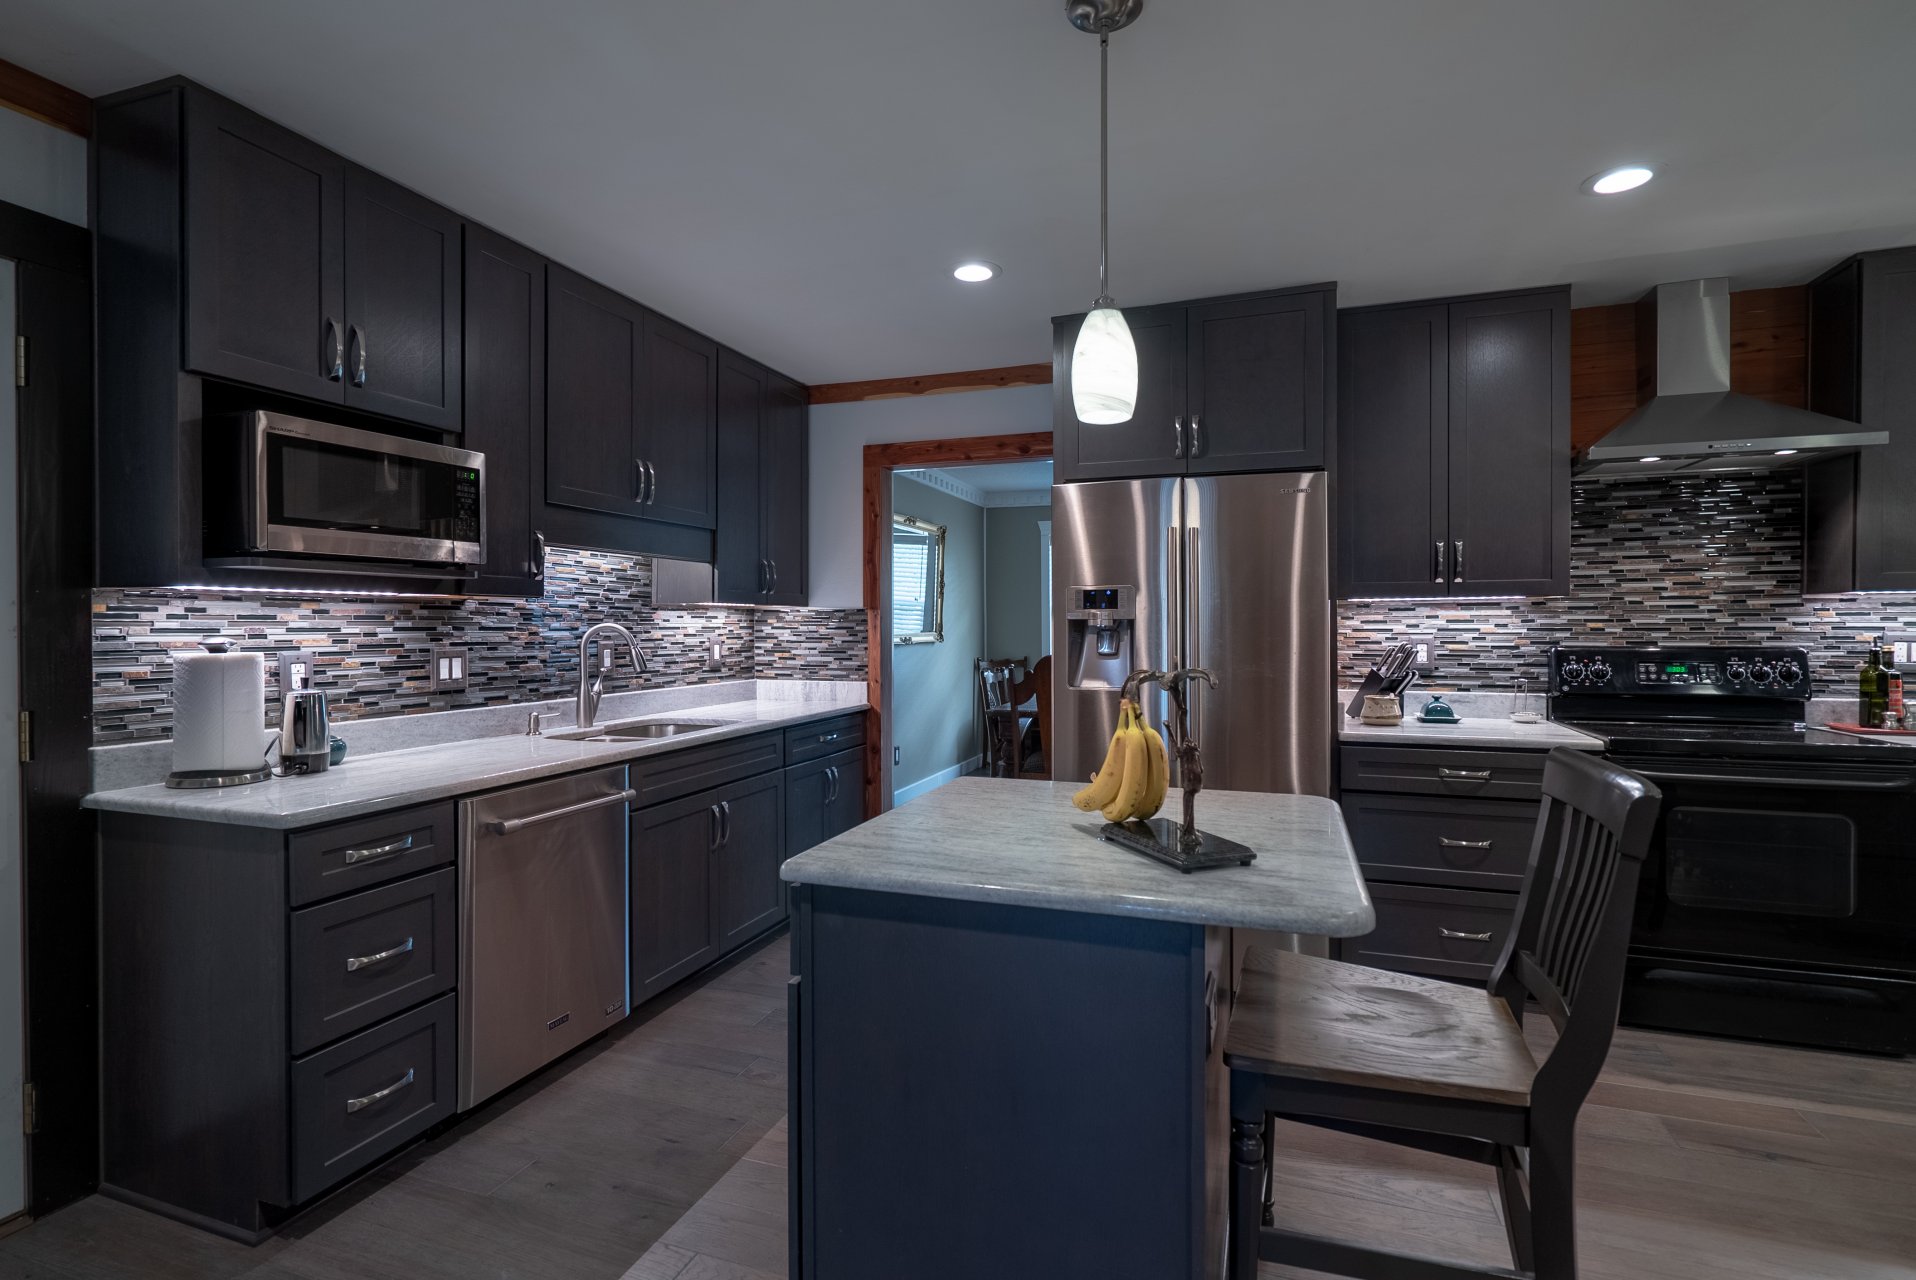 Kitchen and Dining Room Remodel - quartz countertops and stainless appliances